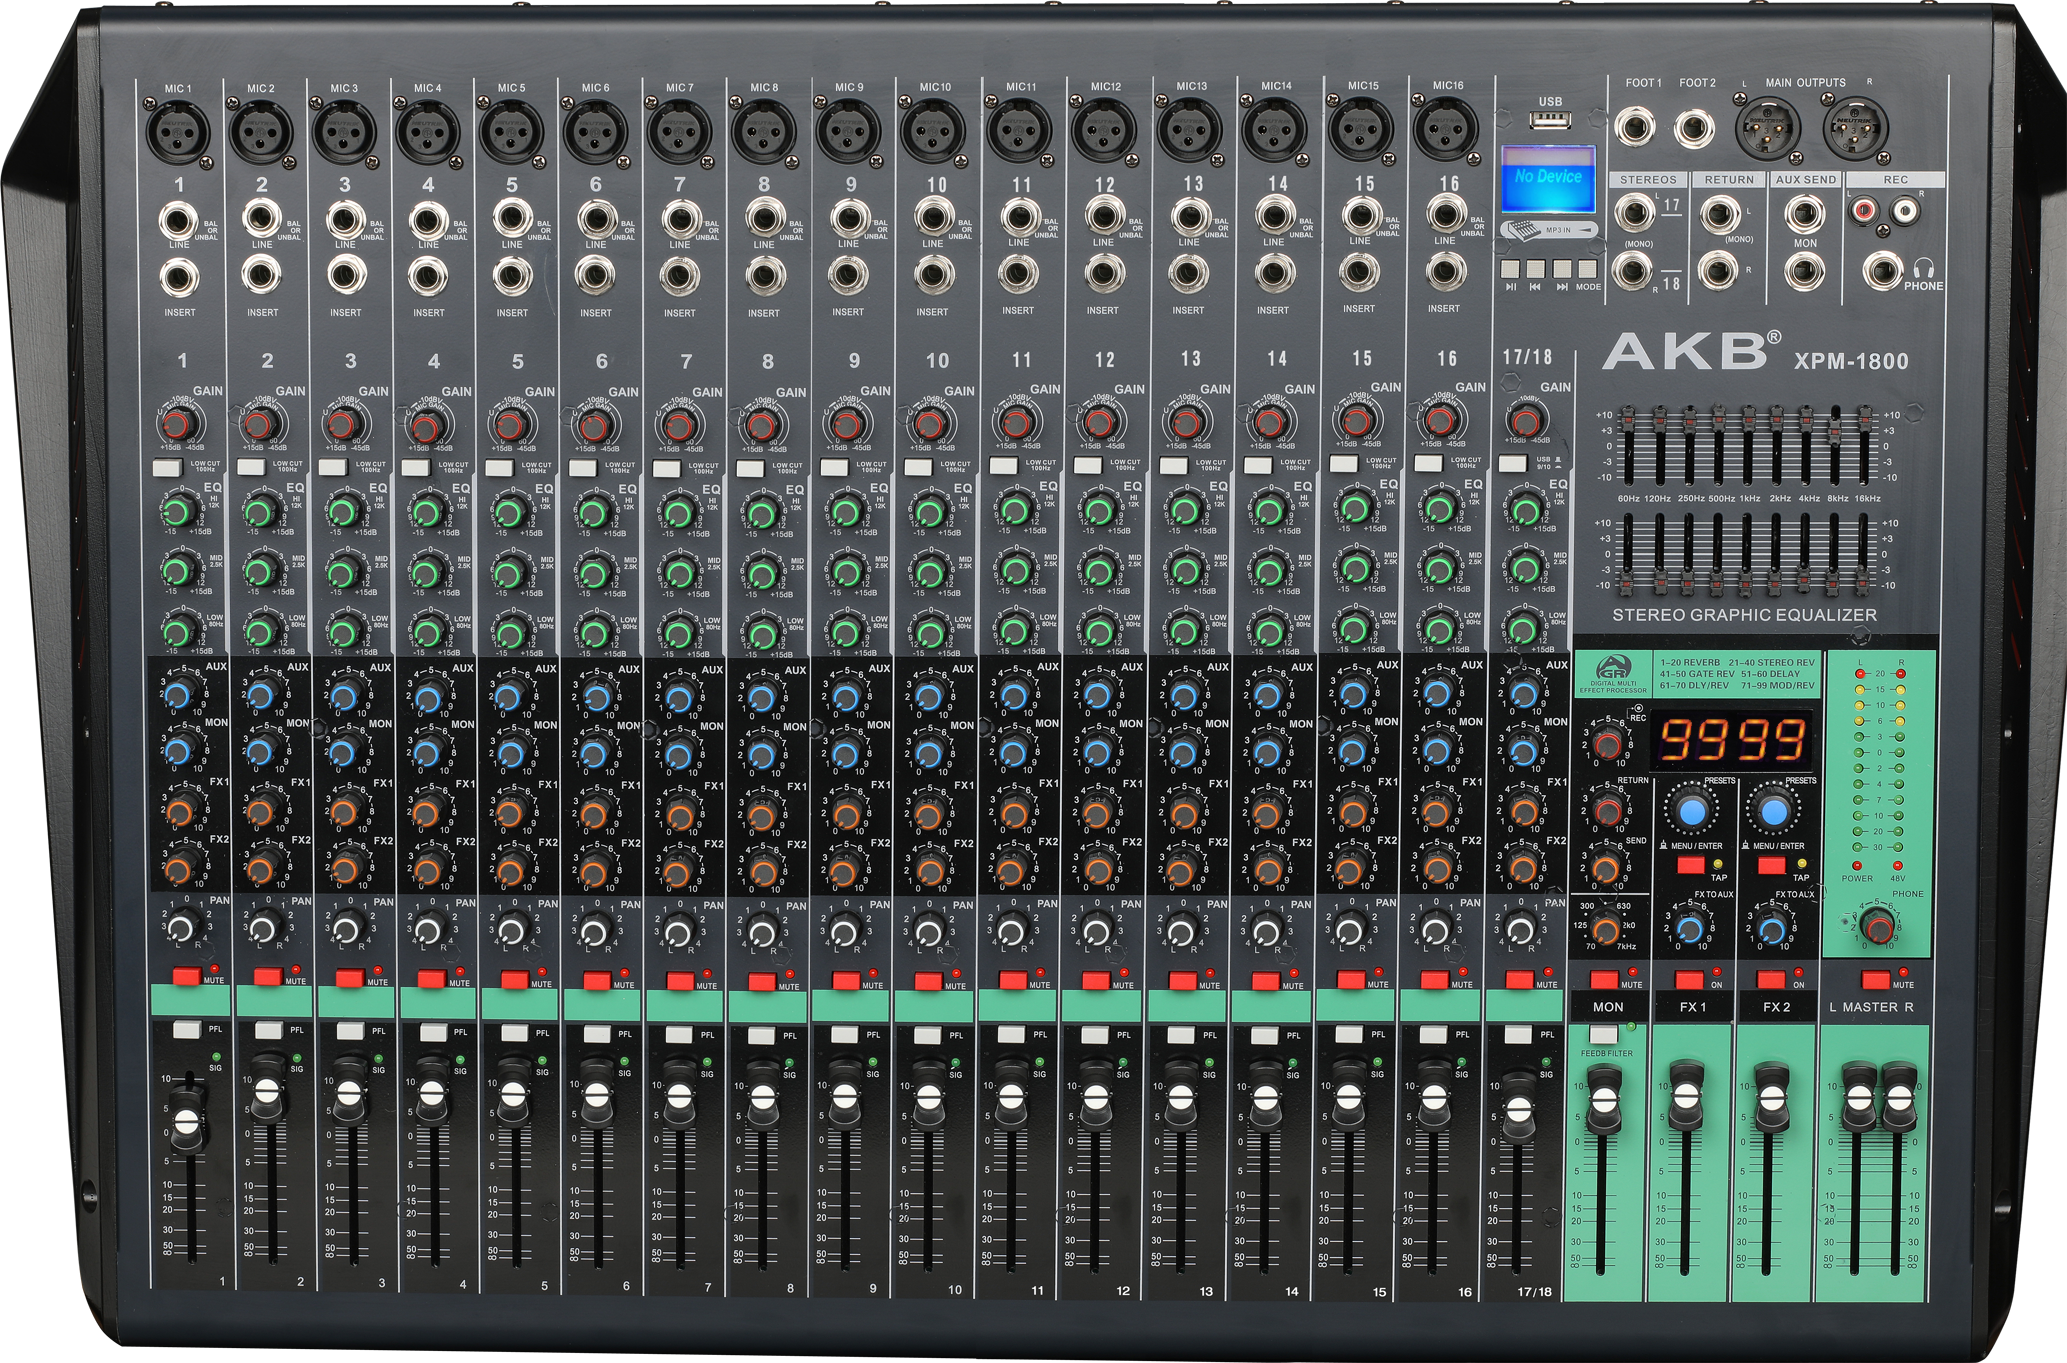 What You Need to Know About a Sound/Power/USB Mixer For Your Home Recording Studio